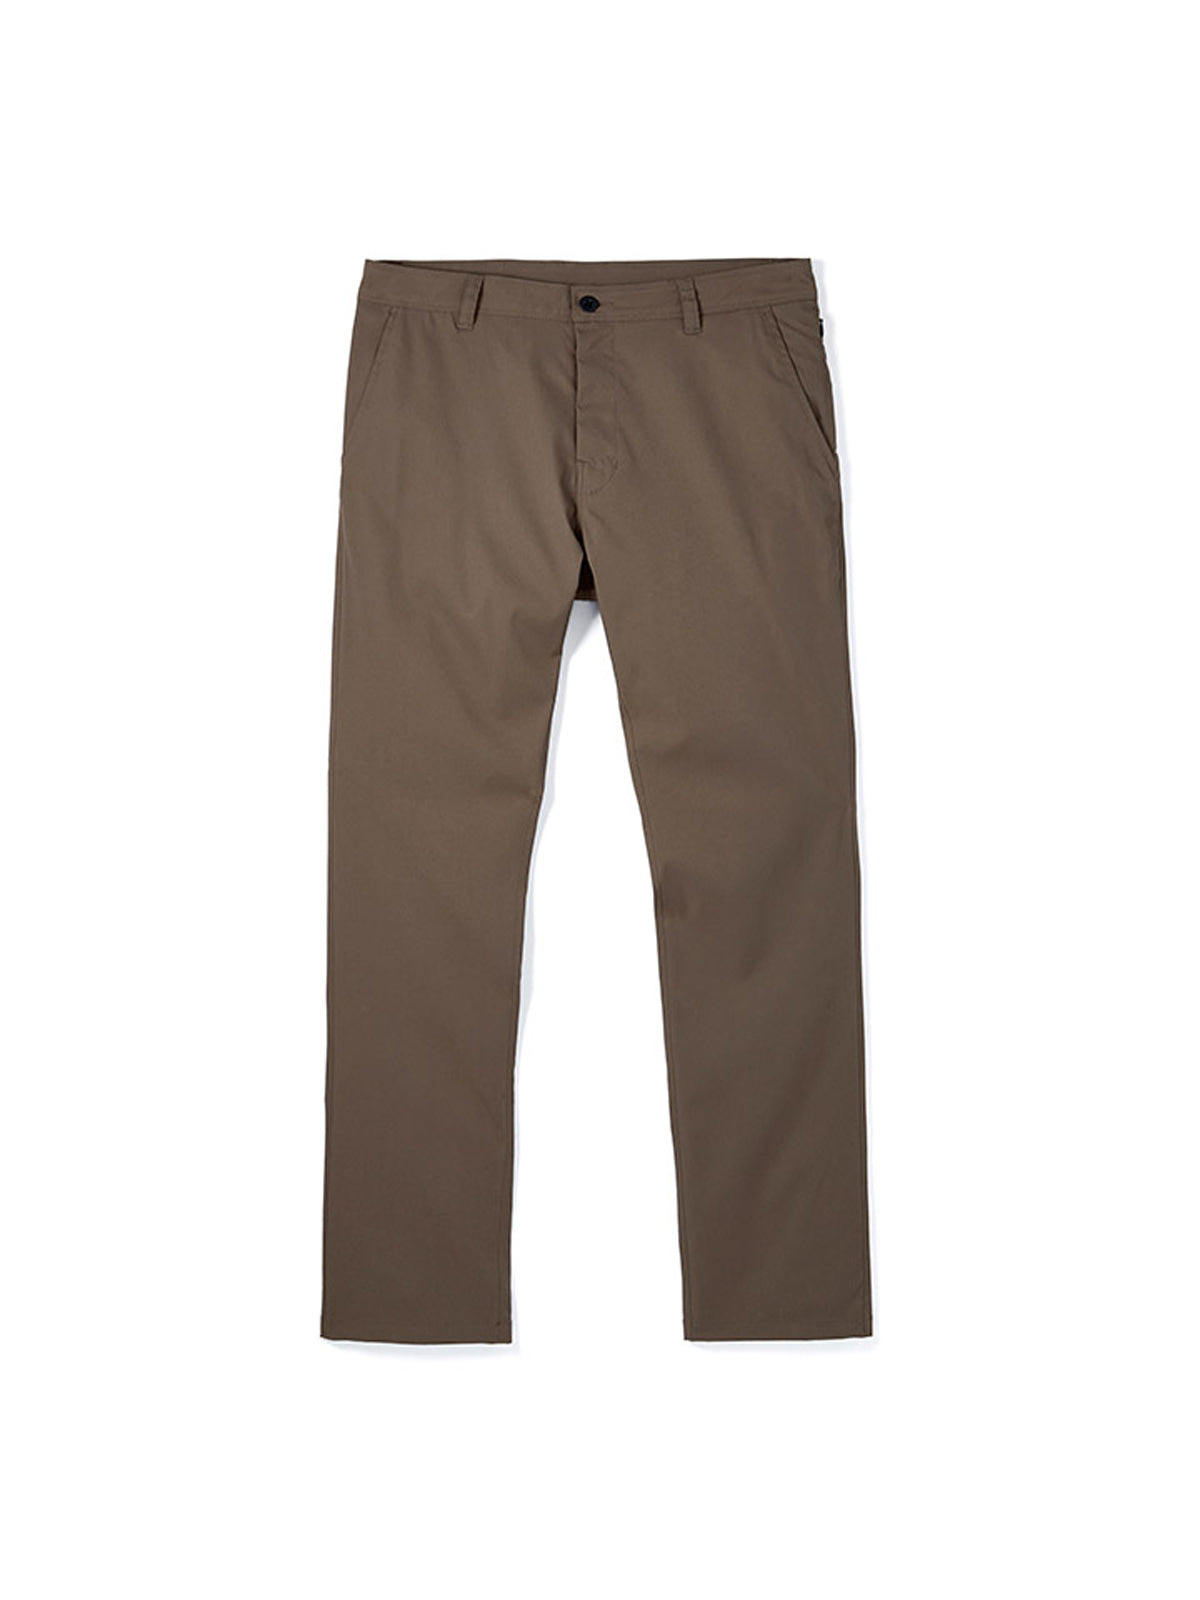 Buy Cotton Casual Trousers For Men Pack of 2 Online In India At Discounted  Prices